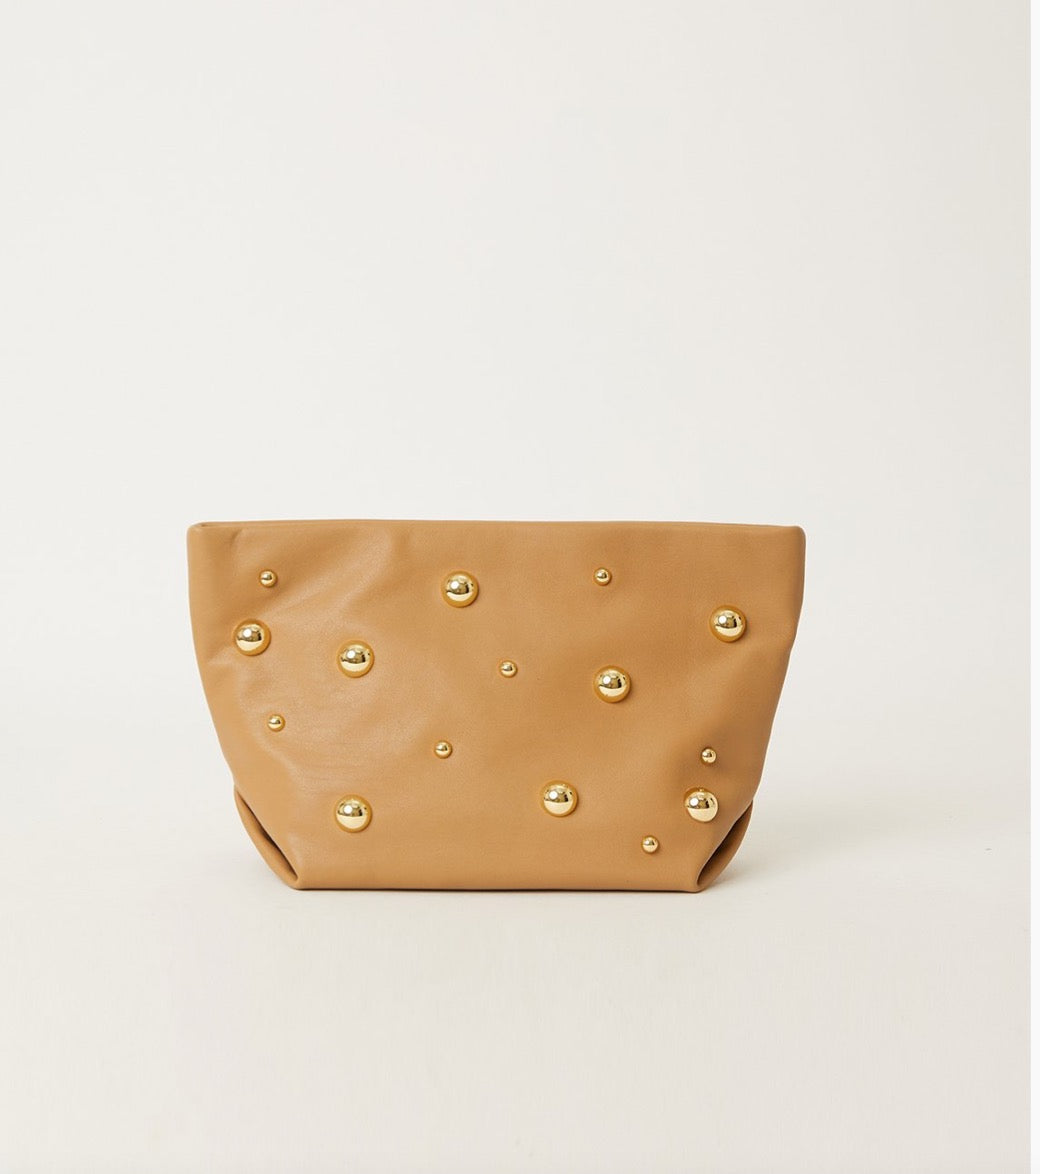 The Georgette Moto Clutch in Canel, Chocolate or Black